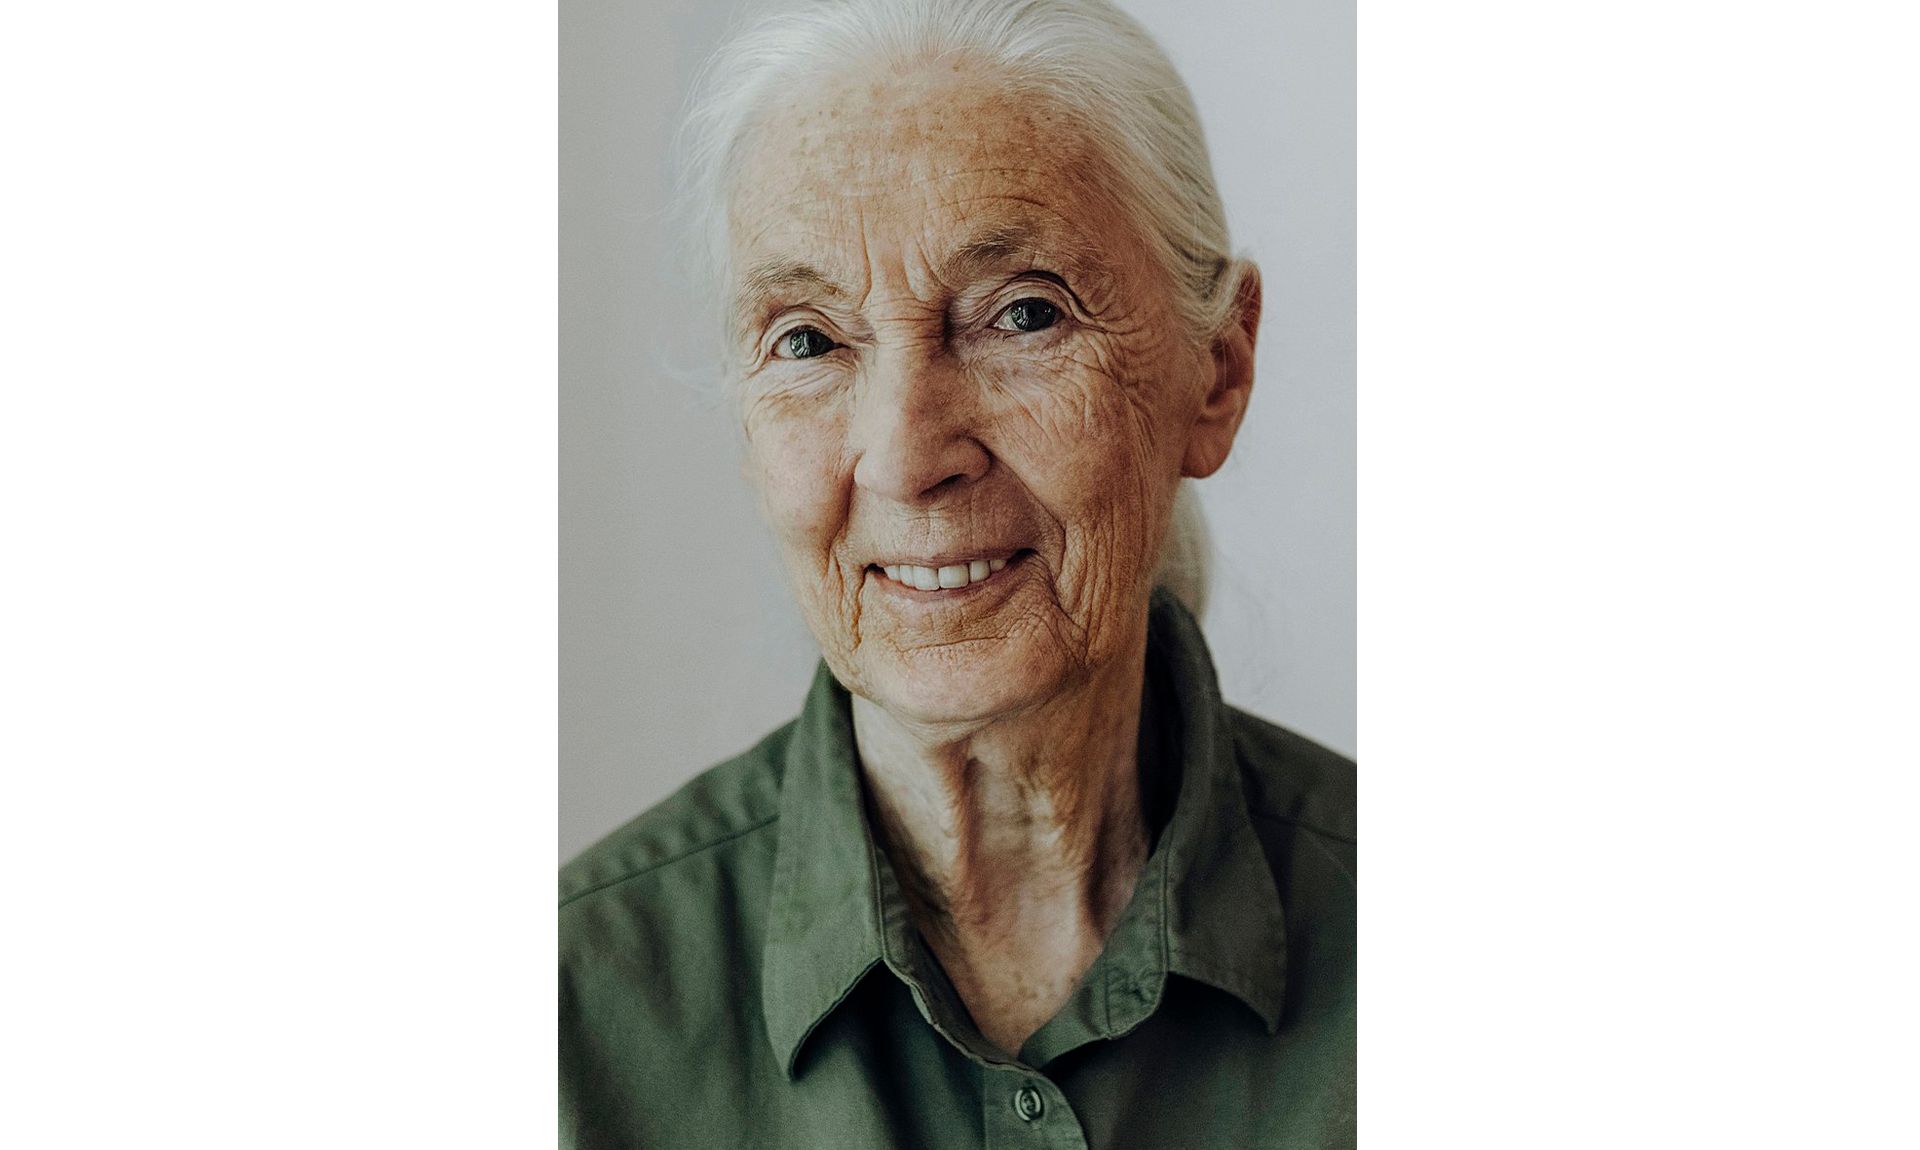 Dr. Jane Goodall was honored with the Lifetime Achievement Award.